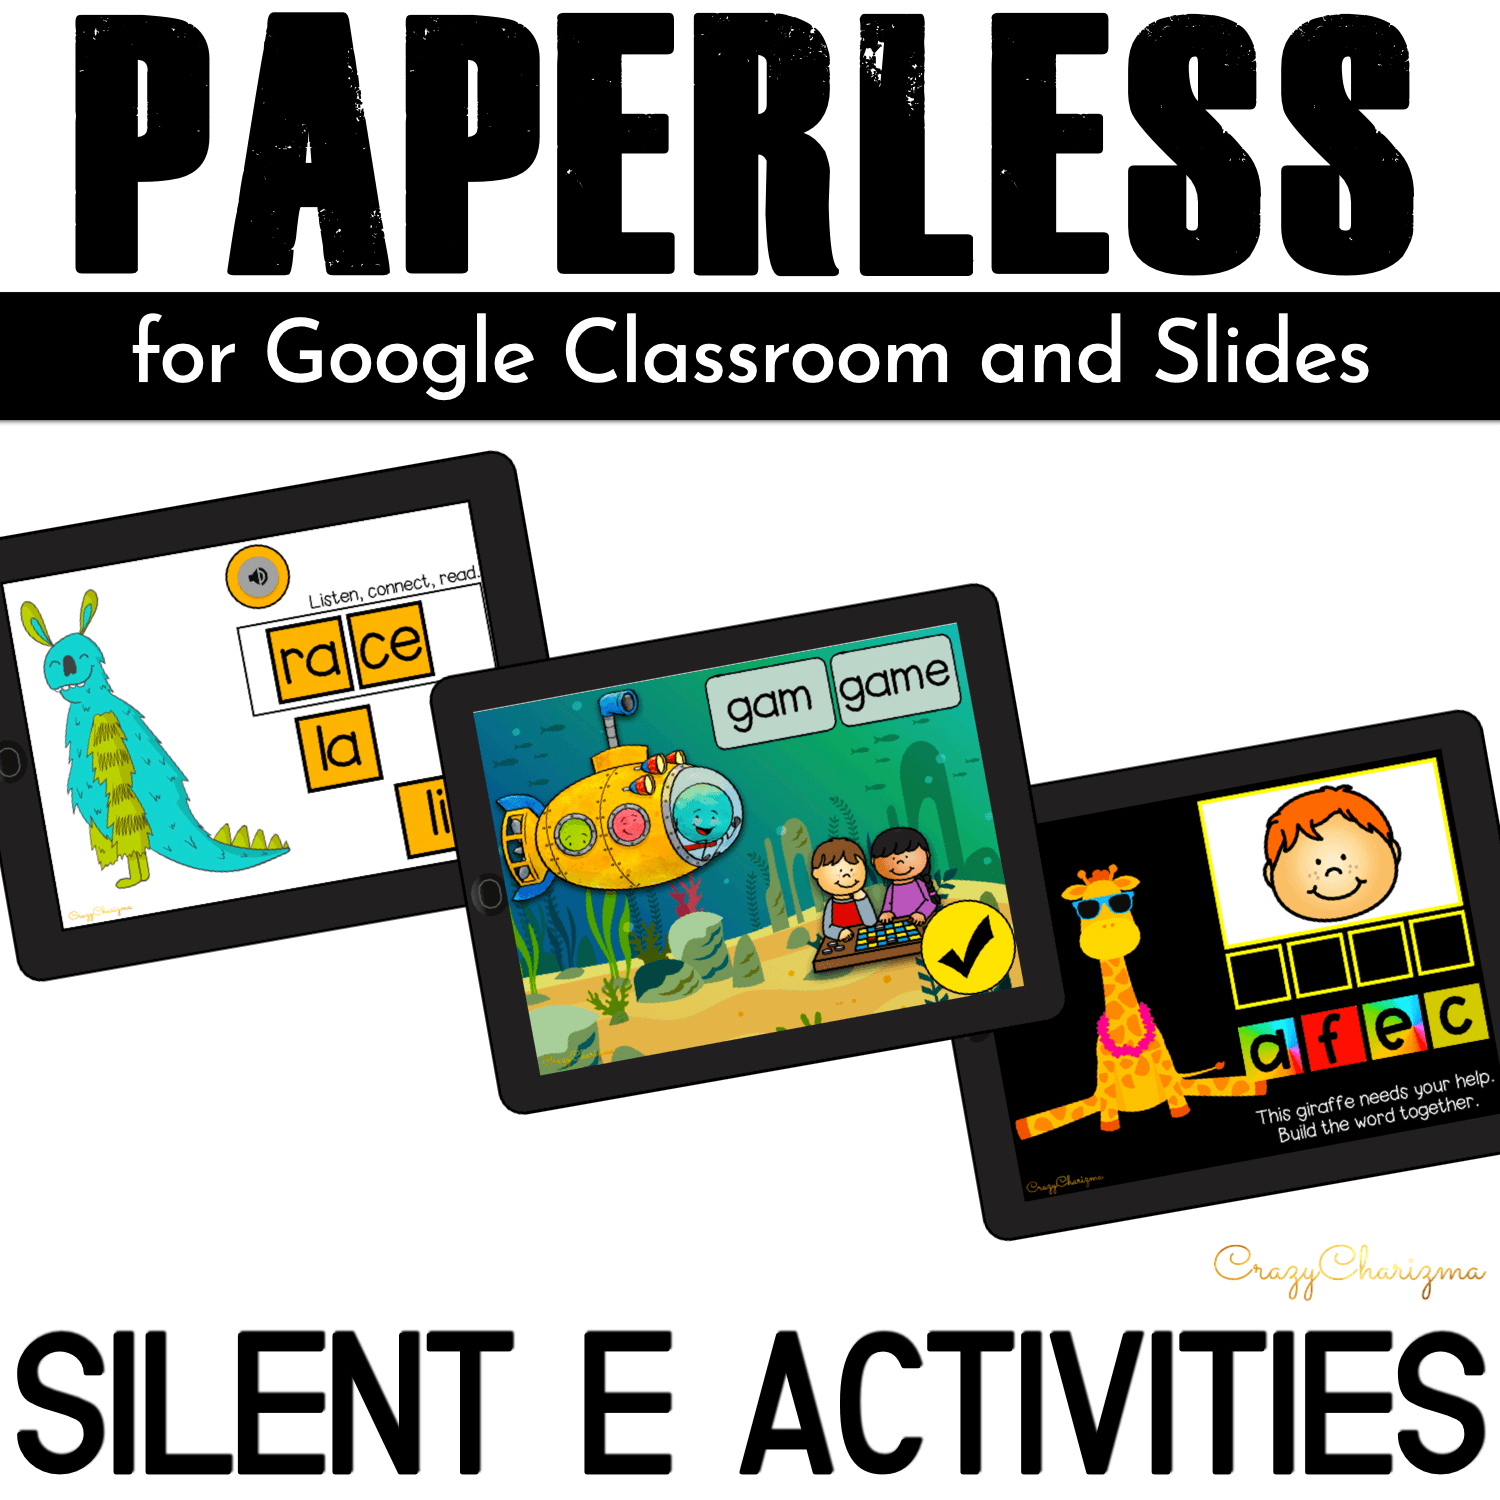 Need cool games to practice magic E? No matter what they call it (silent e or sneaky e), your kids will enjoy these paperless activities. The bundle is perfect for iPads and Chromebooks. Have fun with Google Classroom!